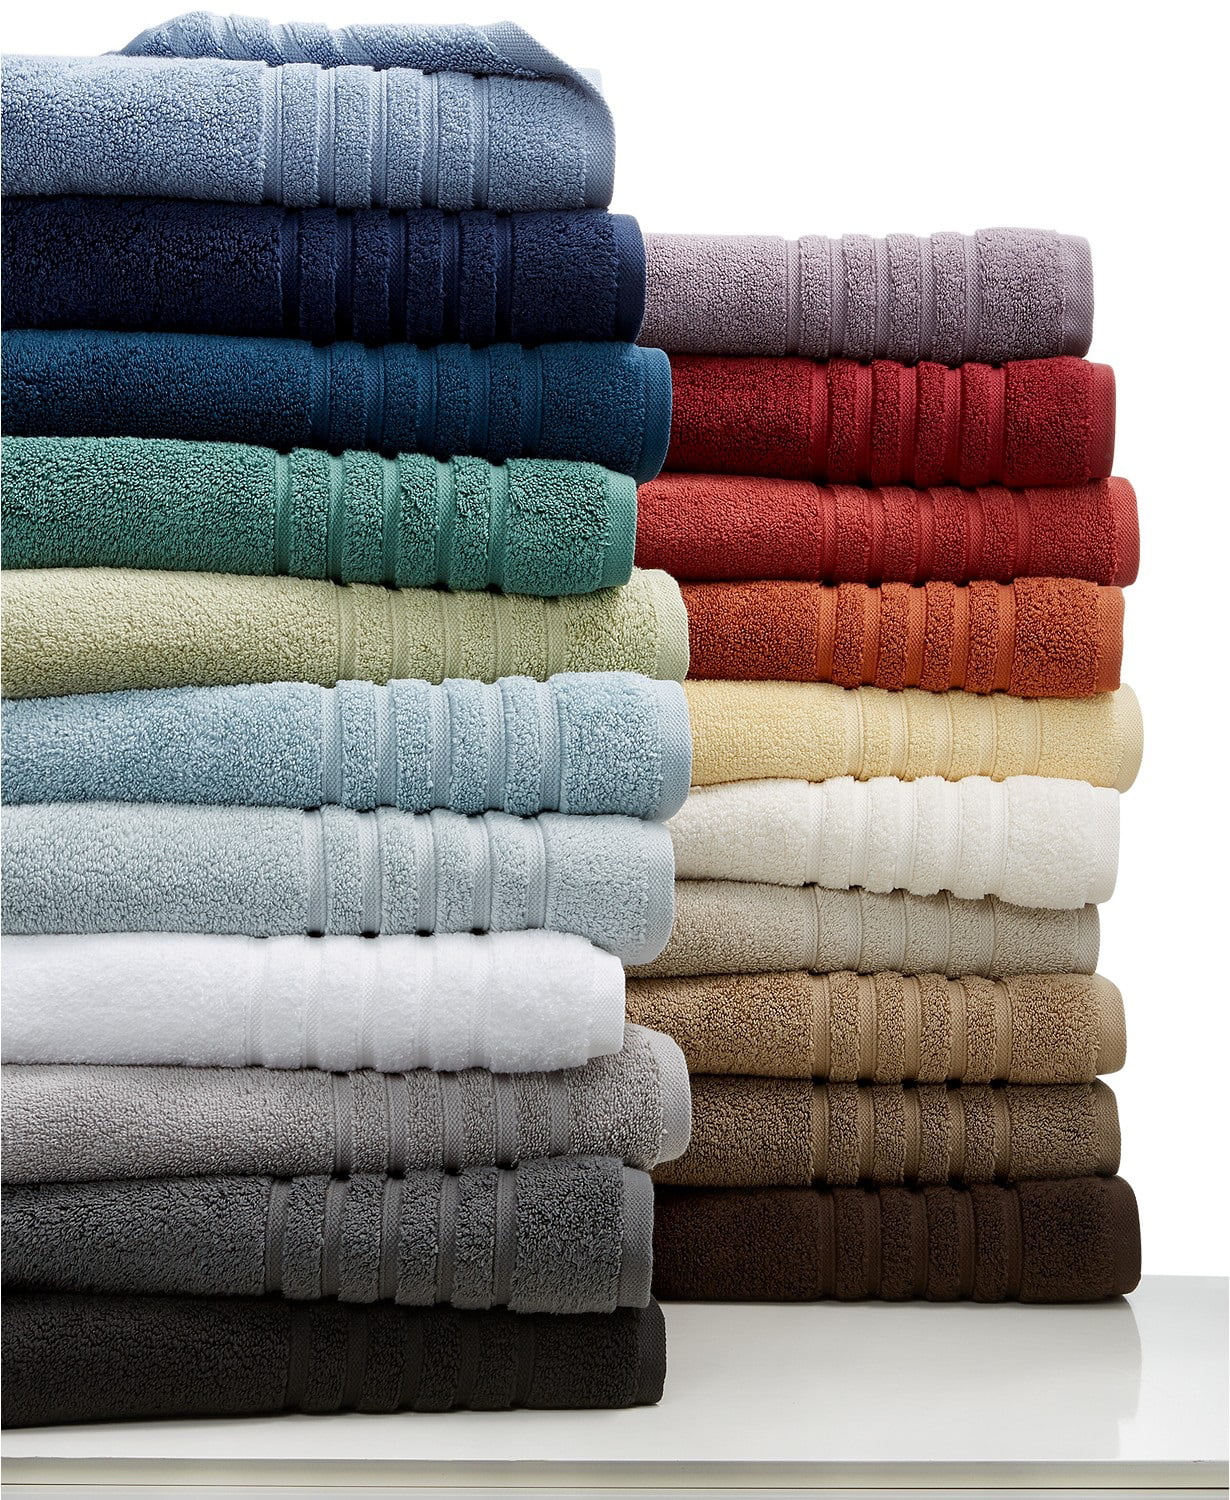 Hotel Collection Ultimate Micro Cotton Bath Towel Dune New